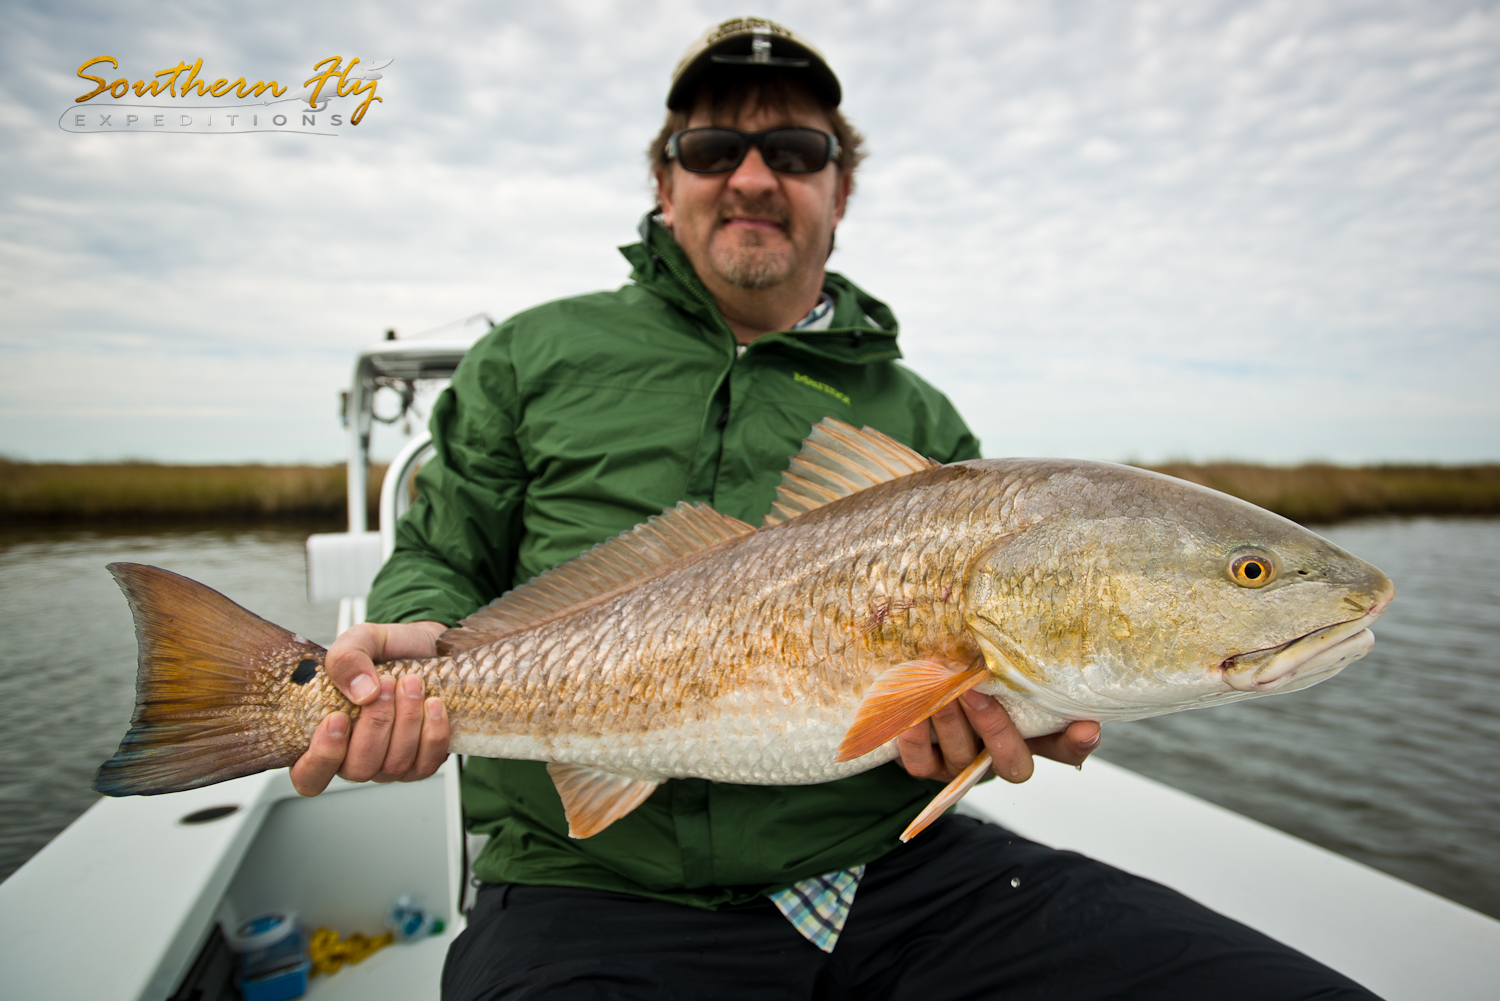 2015-12-16-17-Southern-Fly-Expeditions-BrettBruner-5.jpg